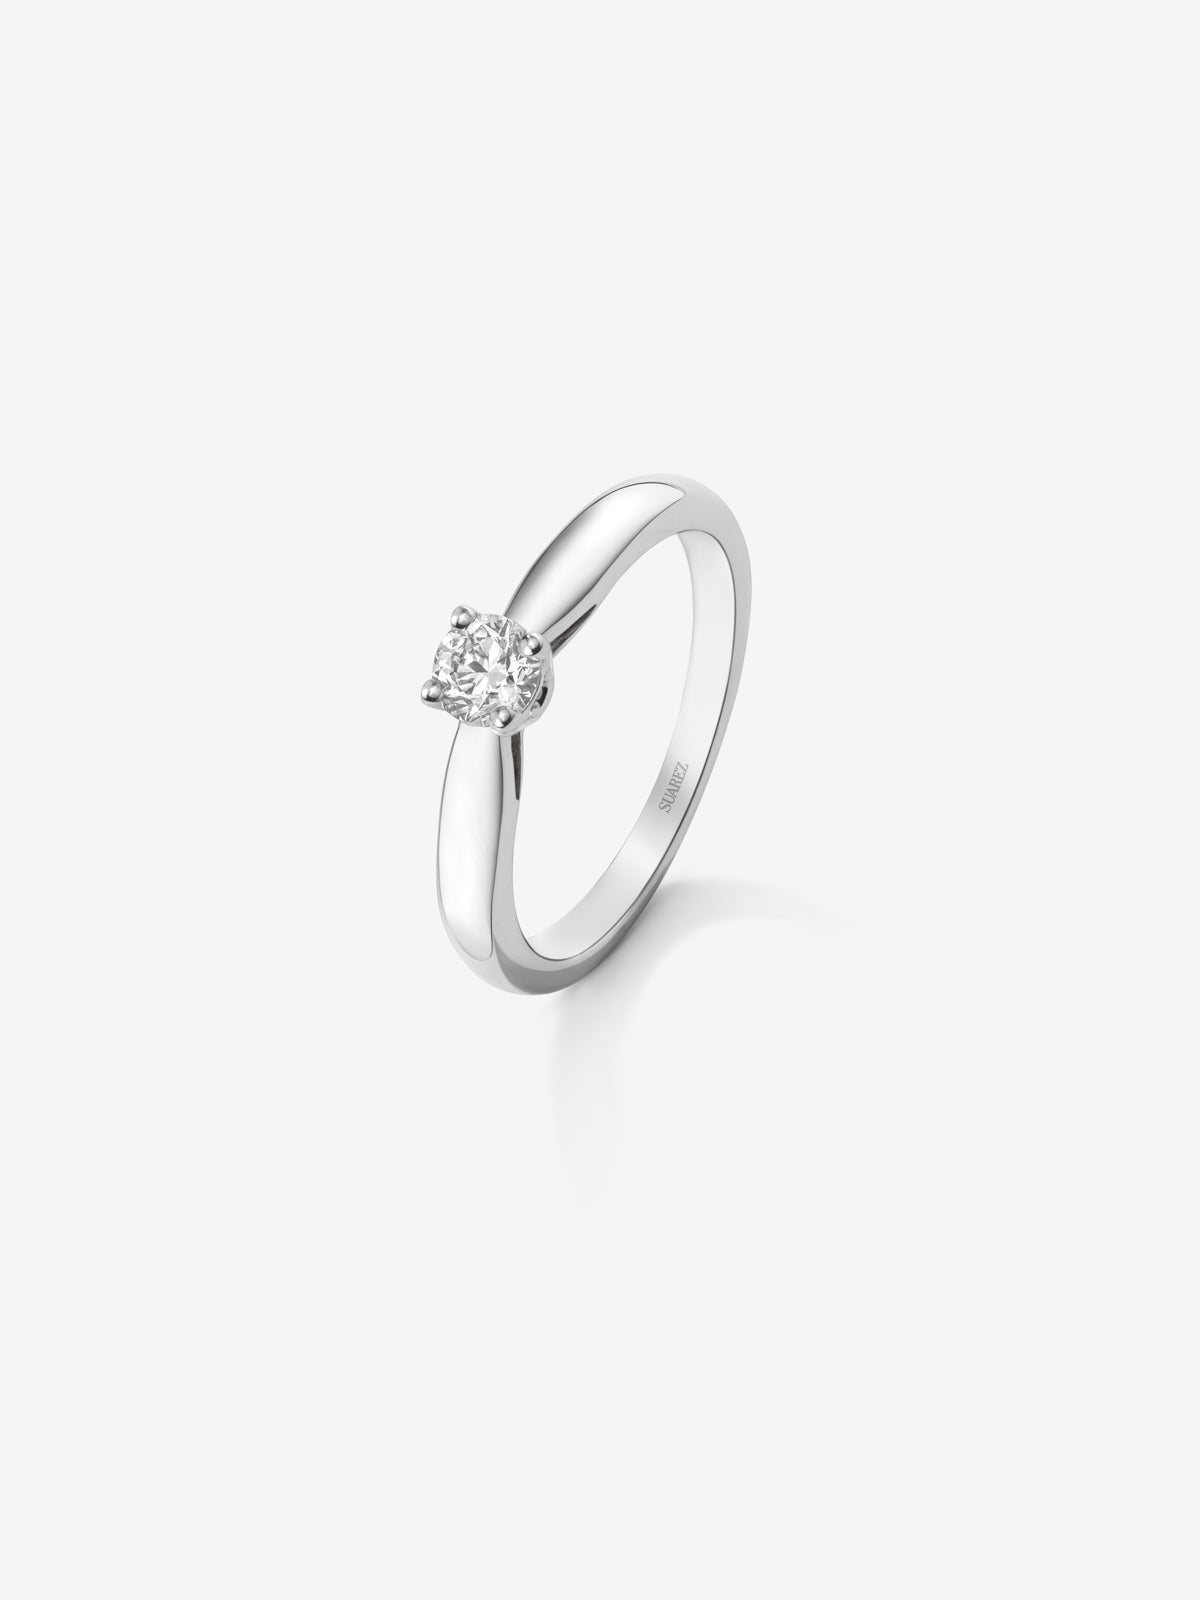 18K white gold solitaire ring with 0.3 ct brilliant cut diamonds